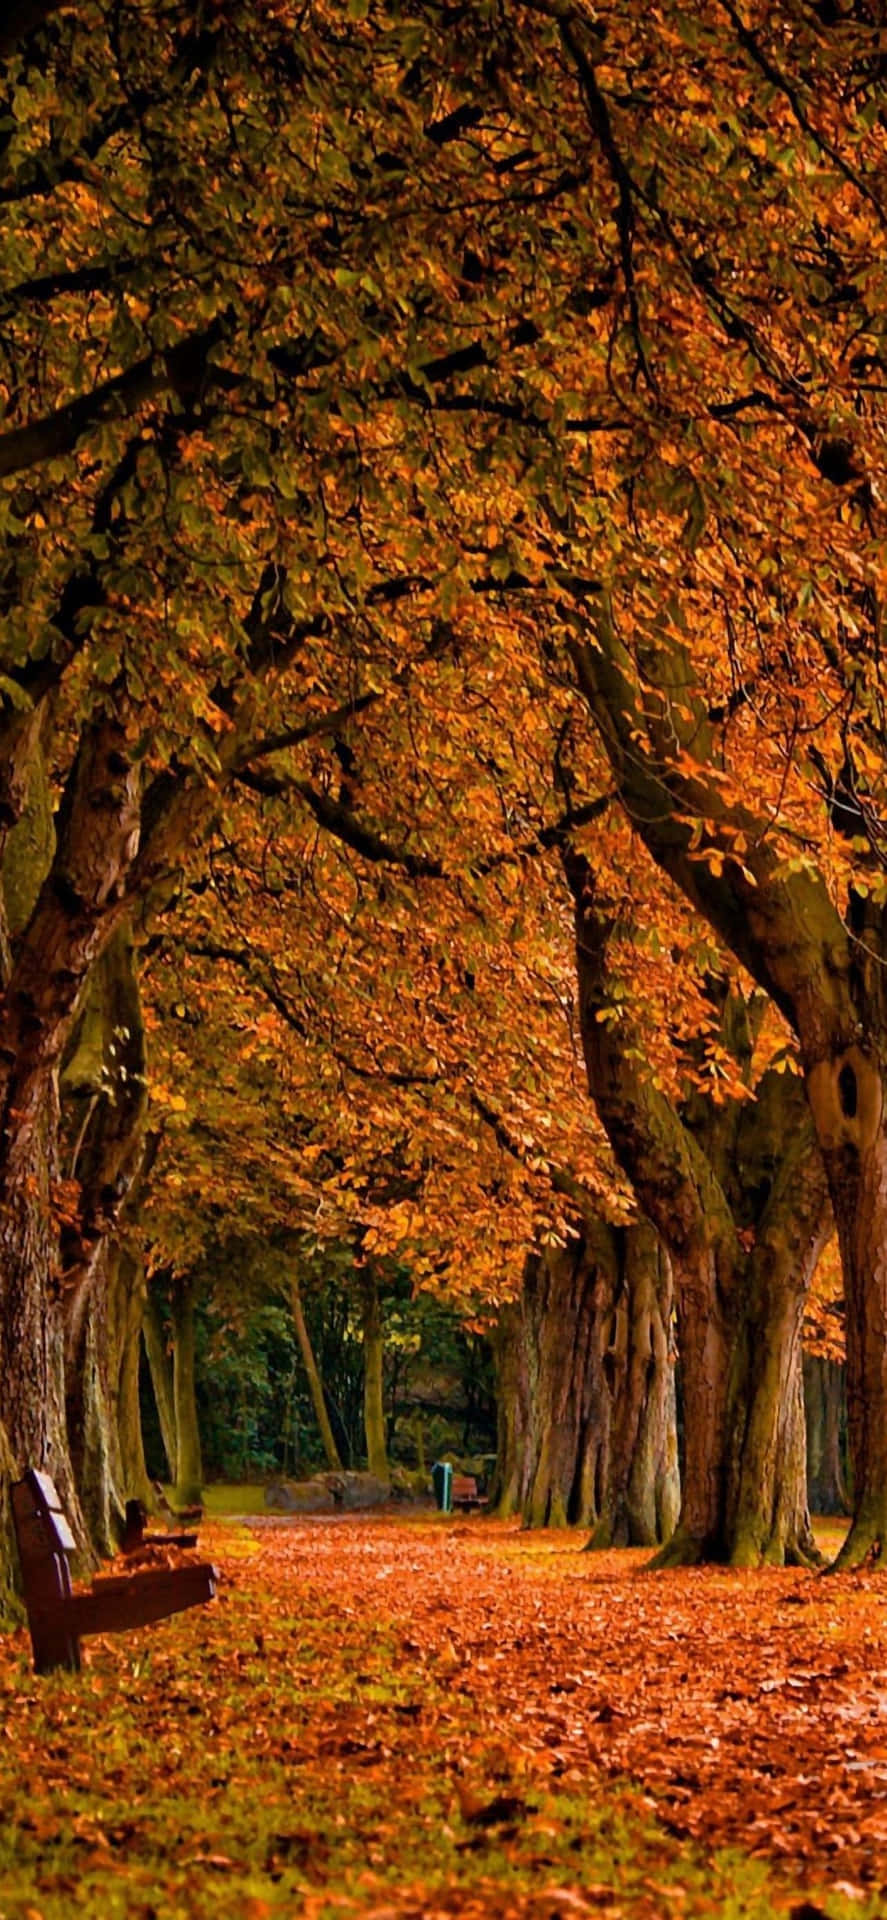 Enjoy the spectacular fall colors of the season with the Iphone 6 Plus Wallpaper